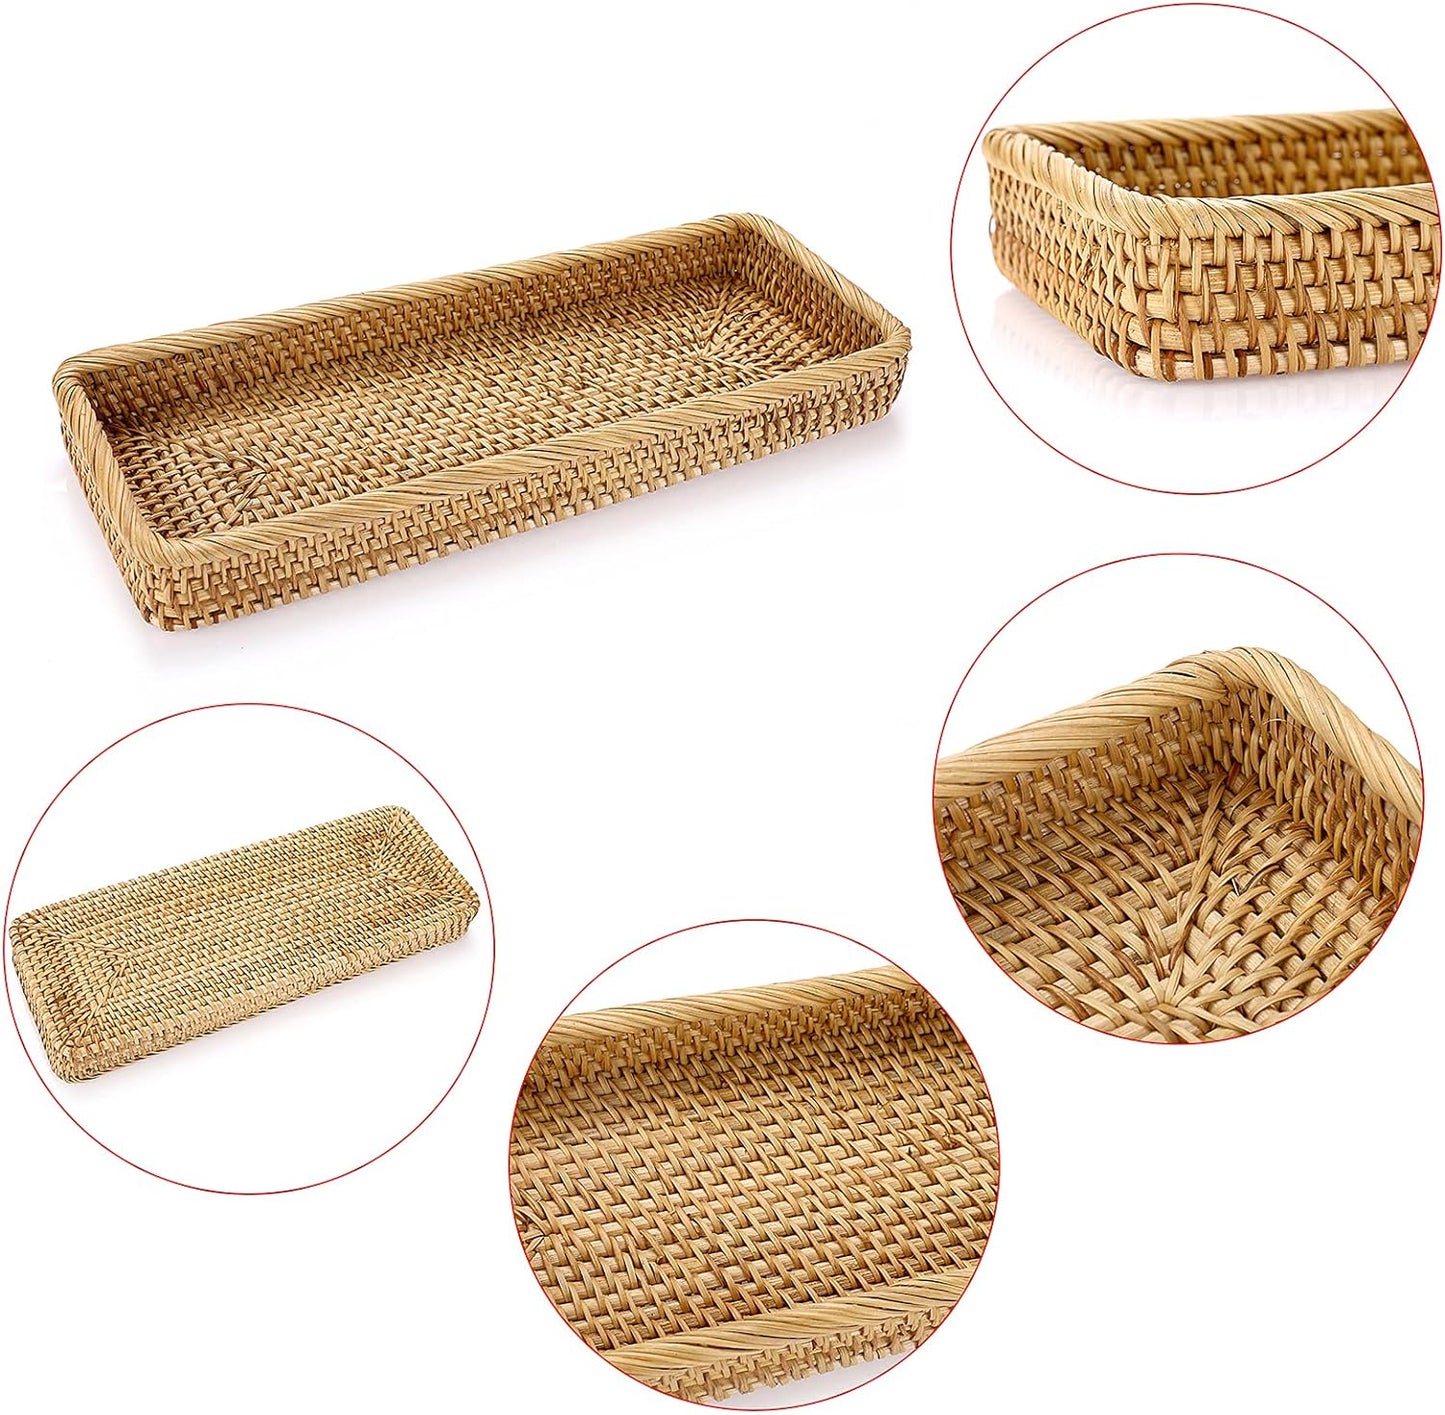 REAL HANDWOVEN RATTAN TRAY WITH HANDMADE WOODEN BEADS GARLAND